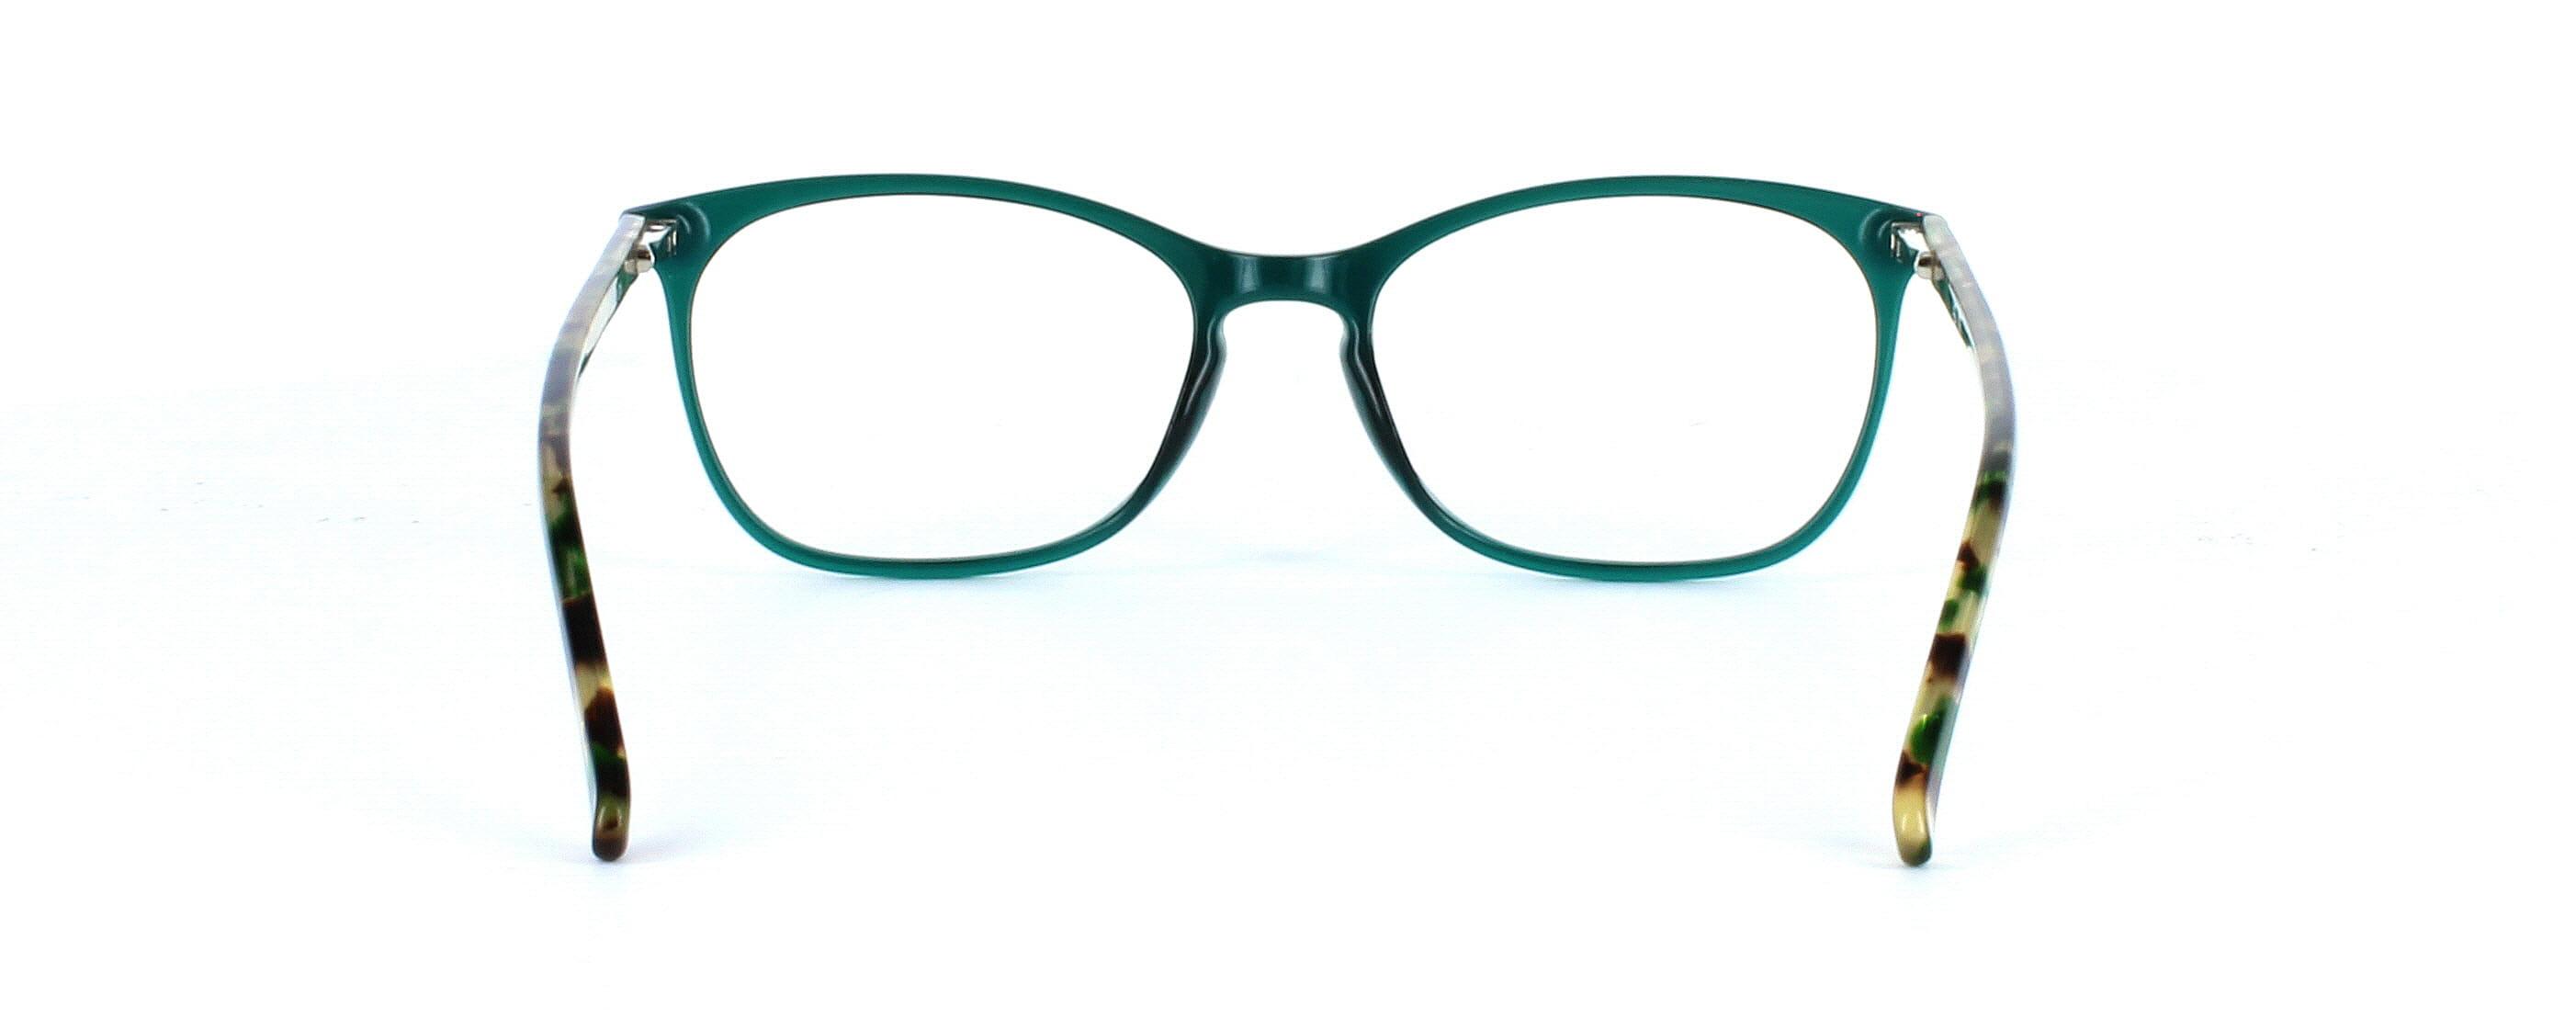 Hackleton - Ladies crystal green plastic glasses with mottled sprung hinge arms - image view 3